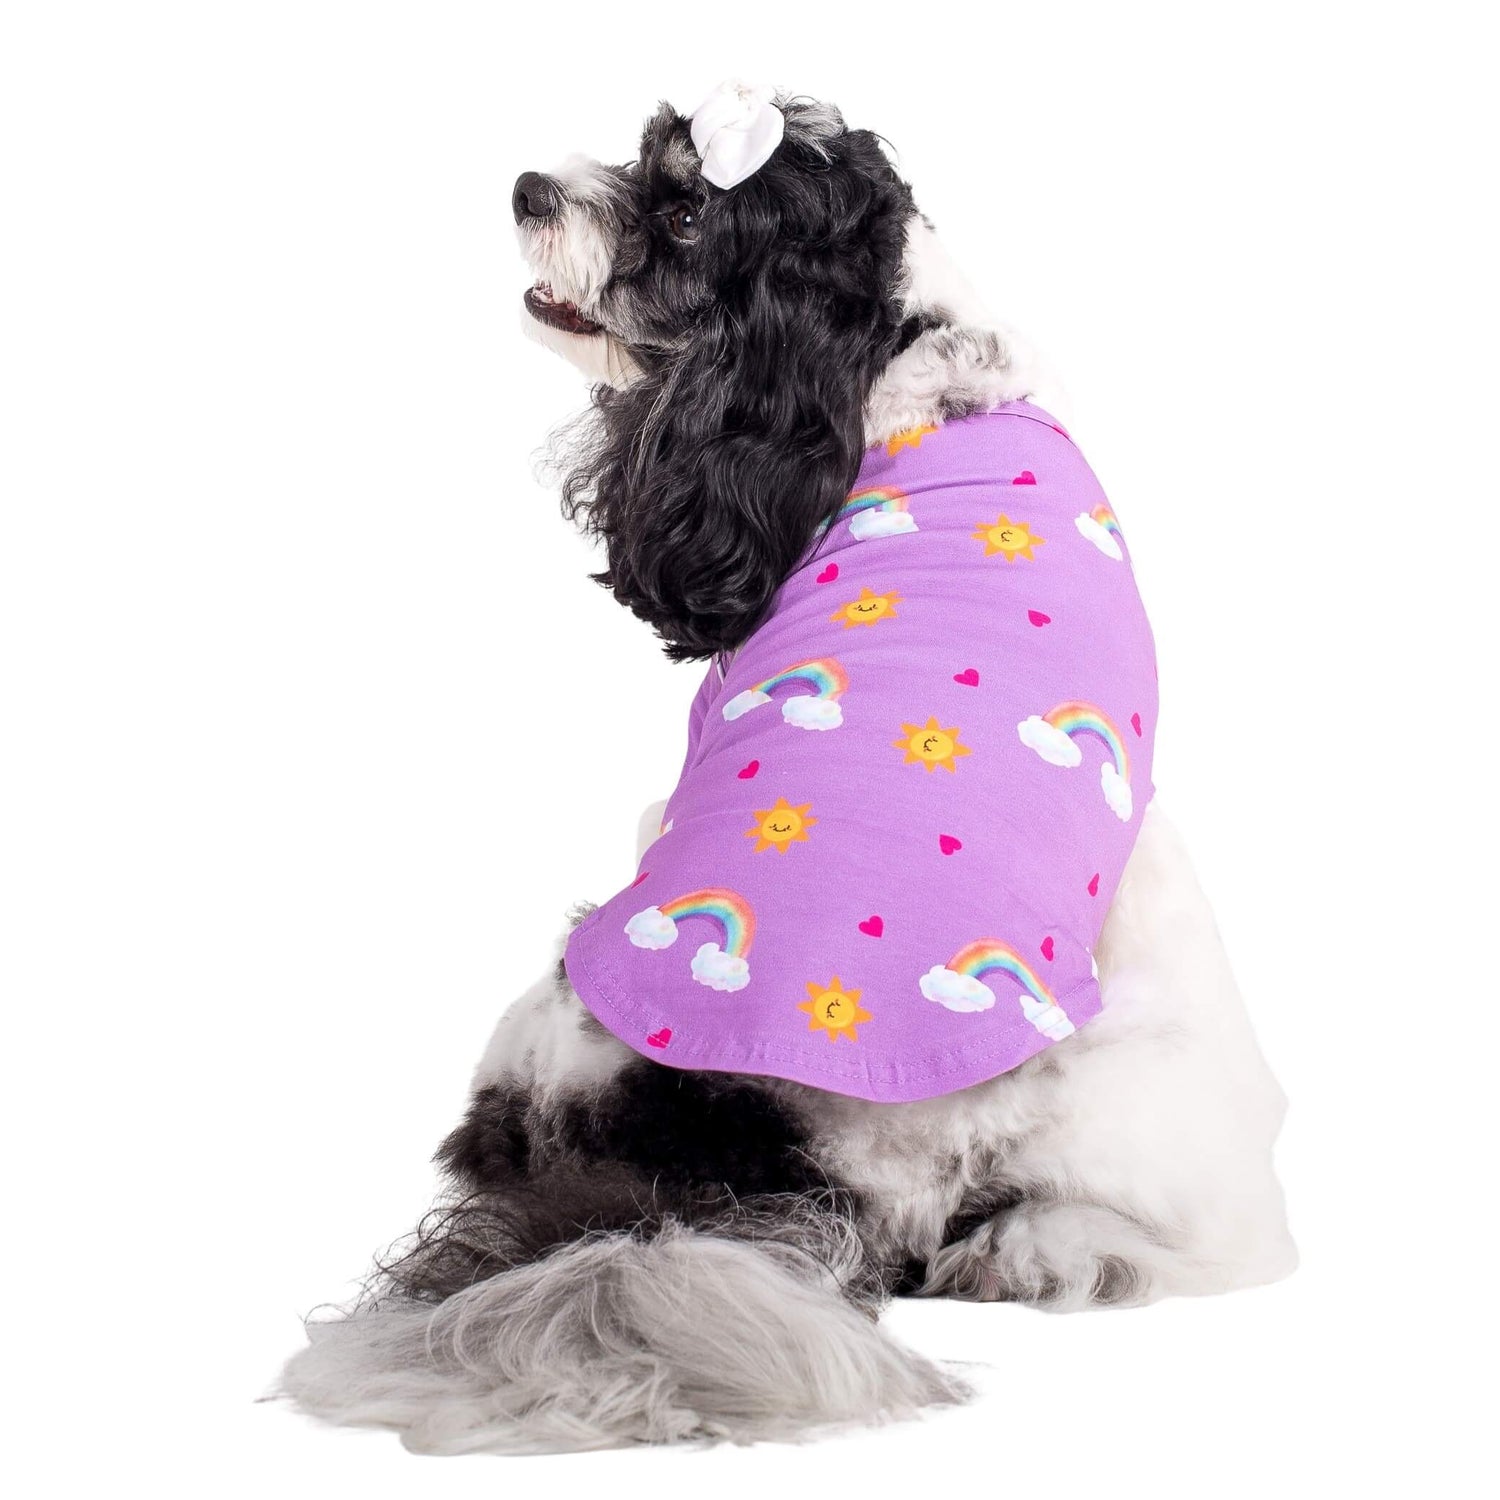 A cavoodle standing backwards wearing  Vibrant Hound's Chasing Rainbow dog pyjama. The dog shirt is purple with rainbows, bright suns, and love hearts printed on it.